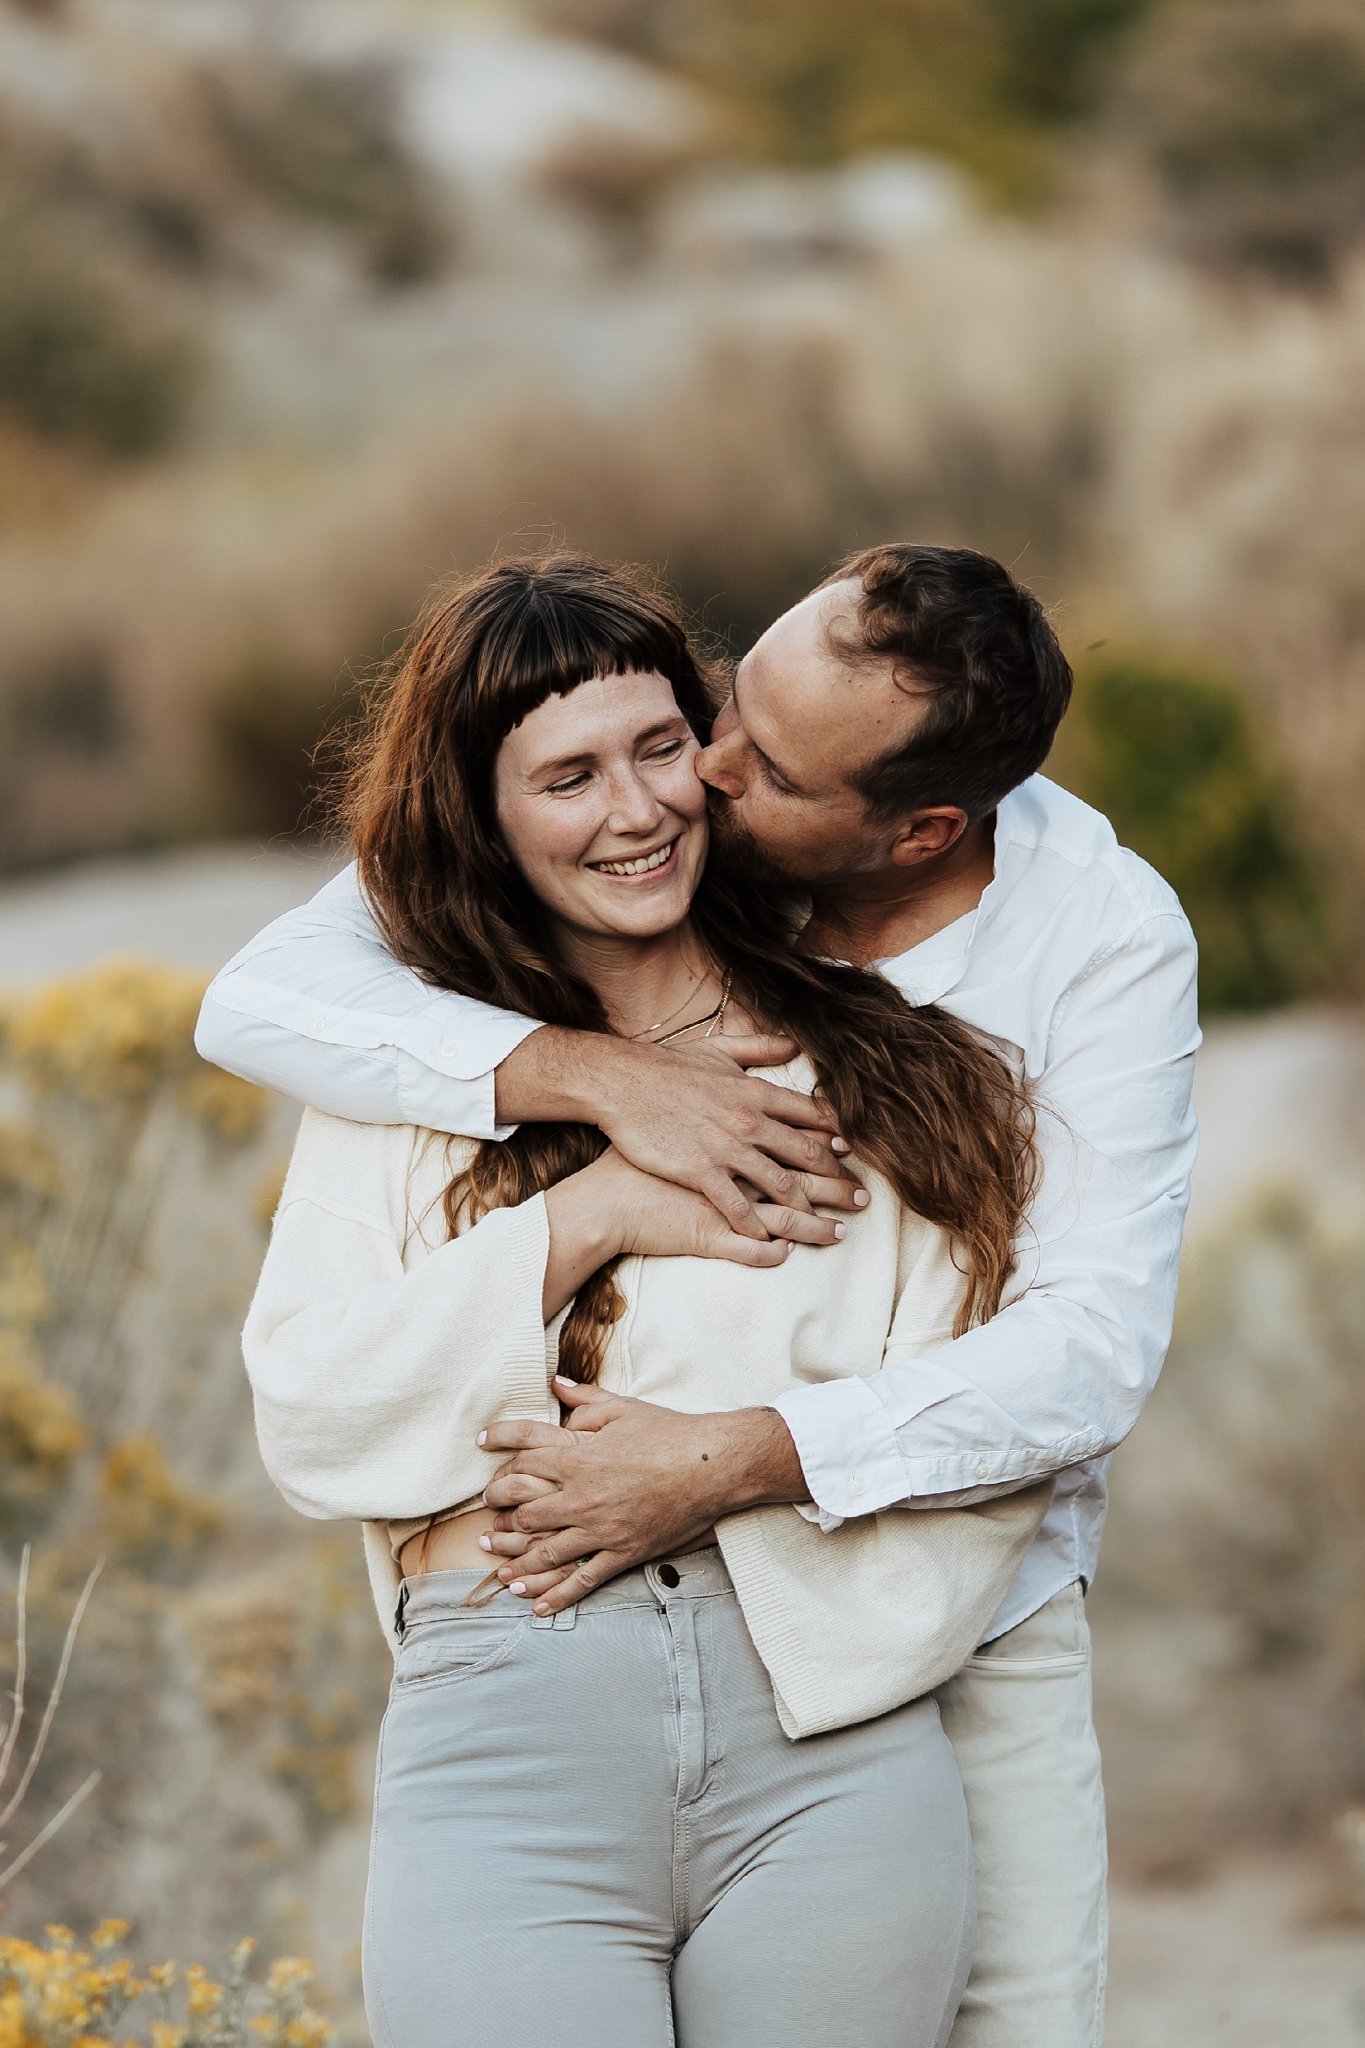 Alicia+lucia+photography+-+albuquerque+wedding+photographer+-+santa+fe+wedding+photography+-+new+mexico+wedding+photographer+-+new+mexico+wedding+-+desert+engagement+-+foothills+engagement+-+mountain+engagement_0009.jpg